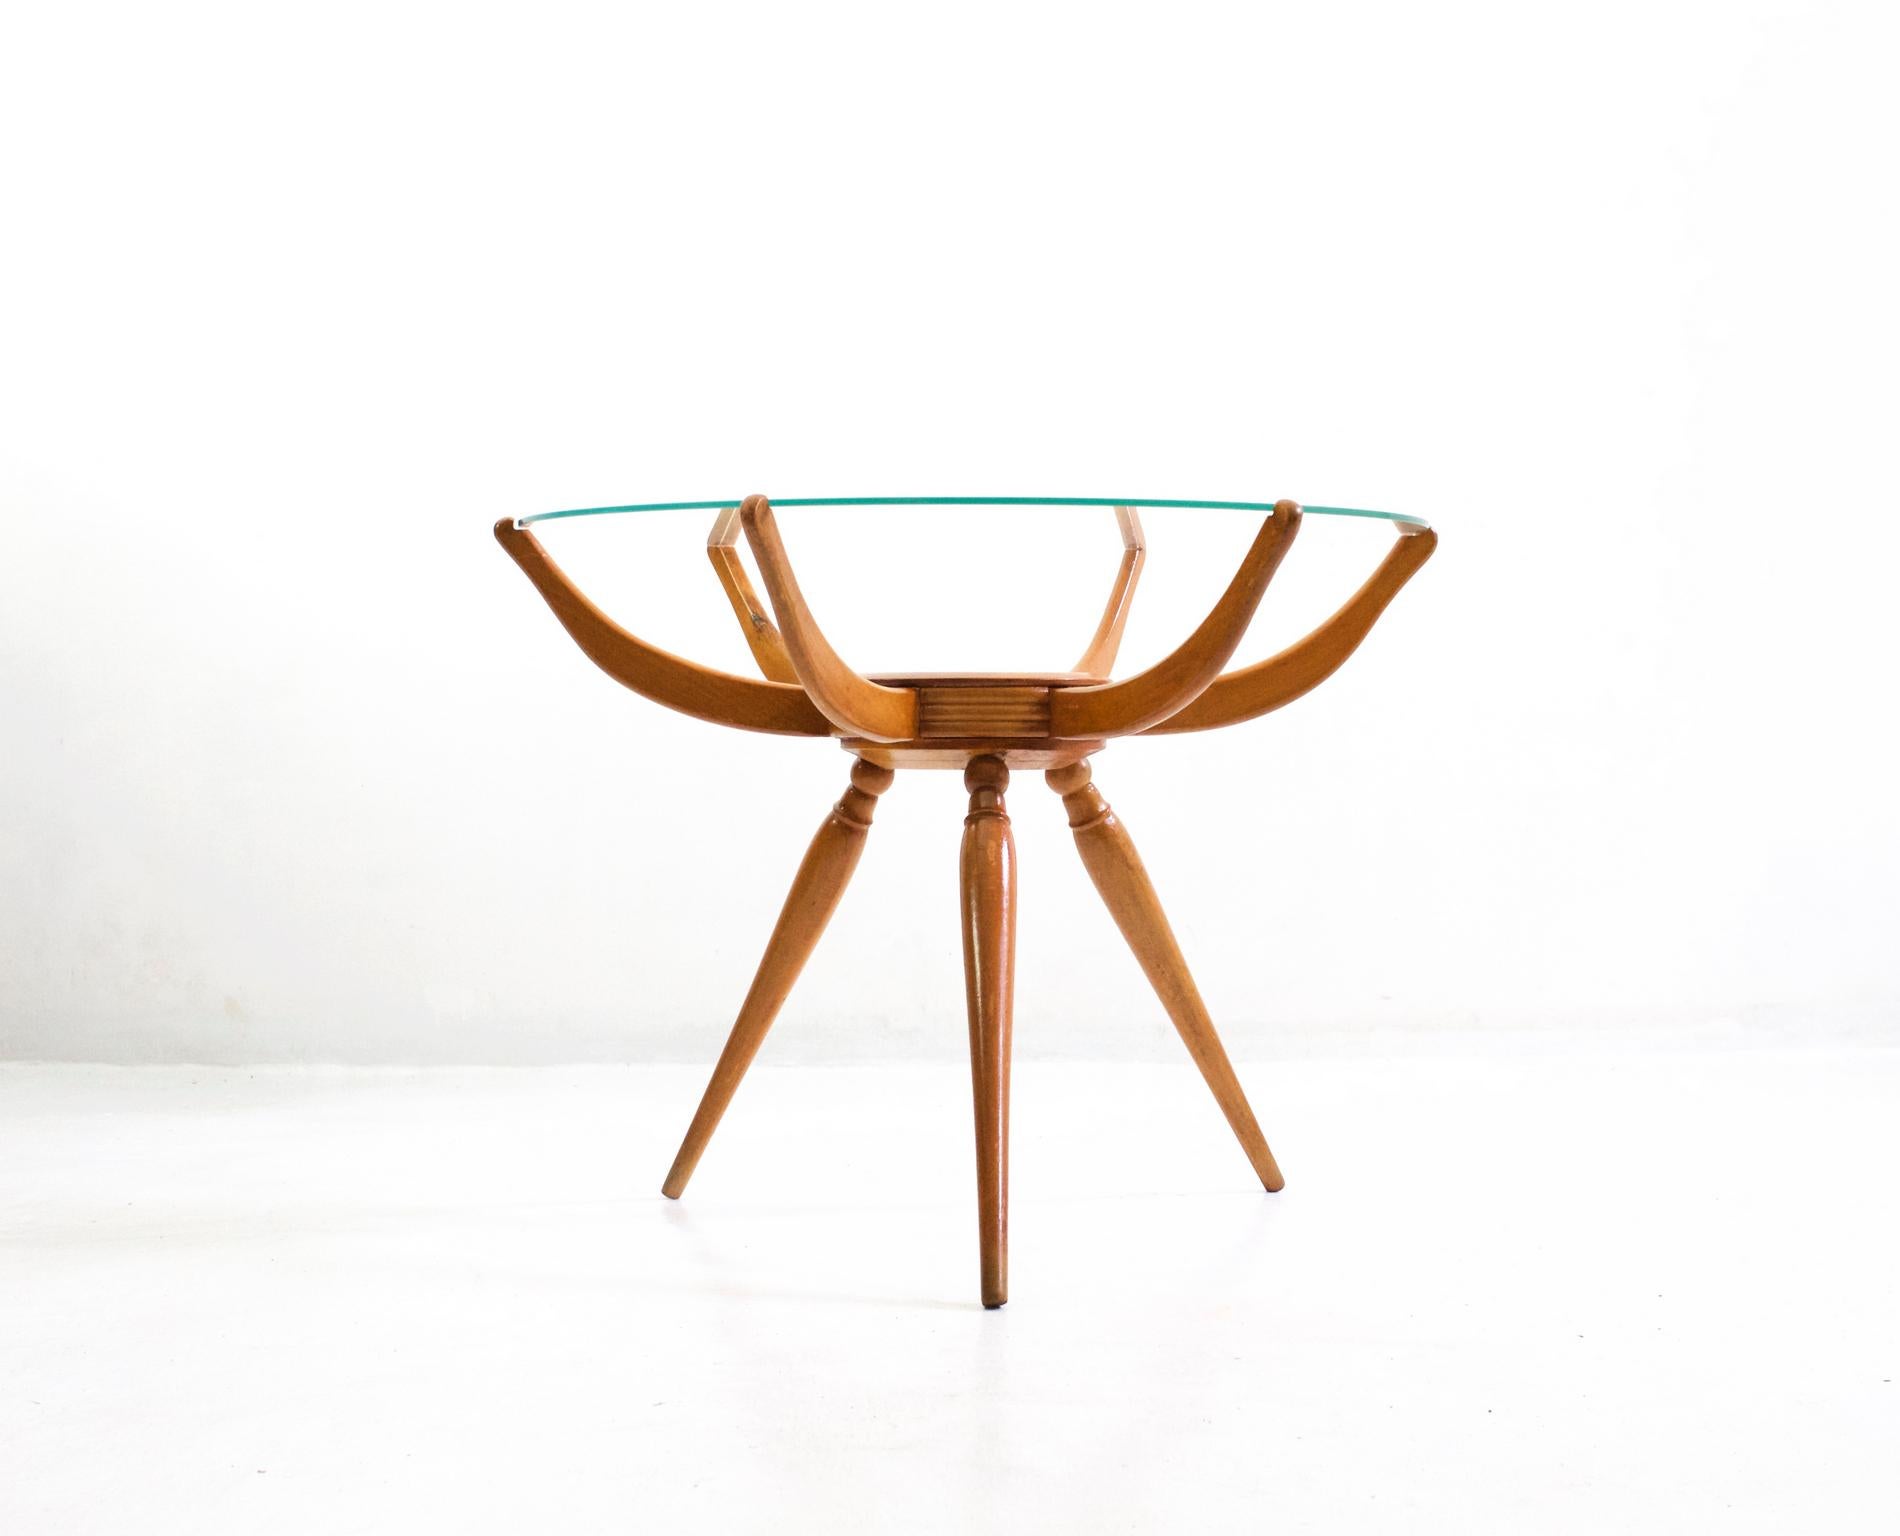 Round tripod table by Italian designer Carlo de Carli in beech with a round glass top which has been fully restored.